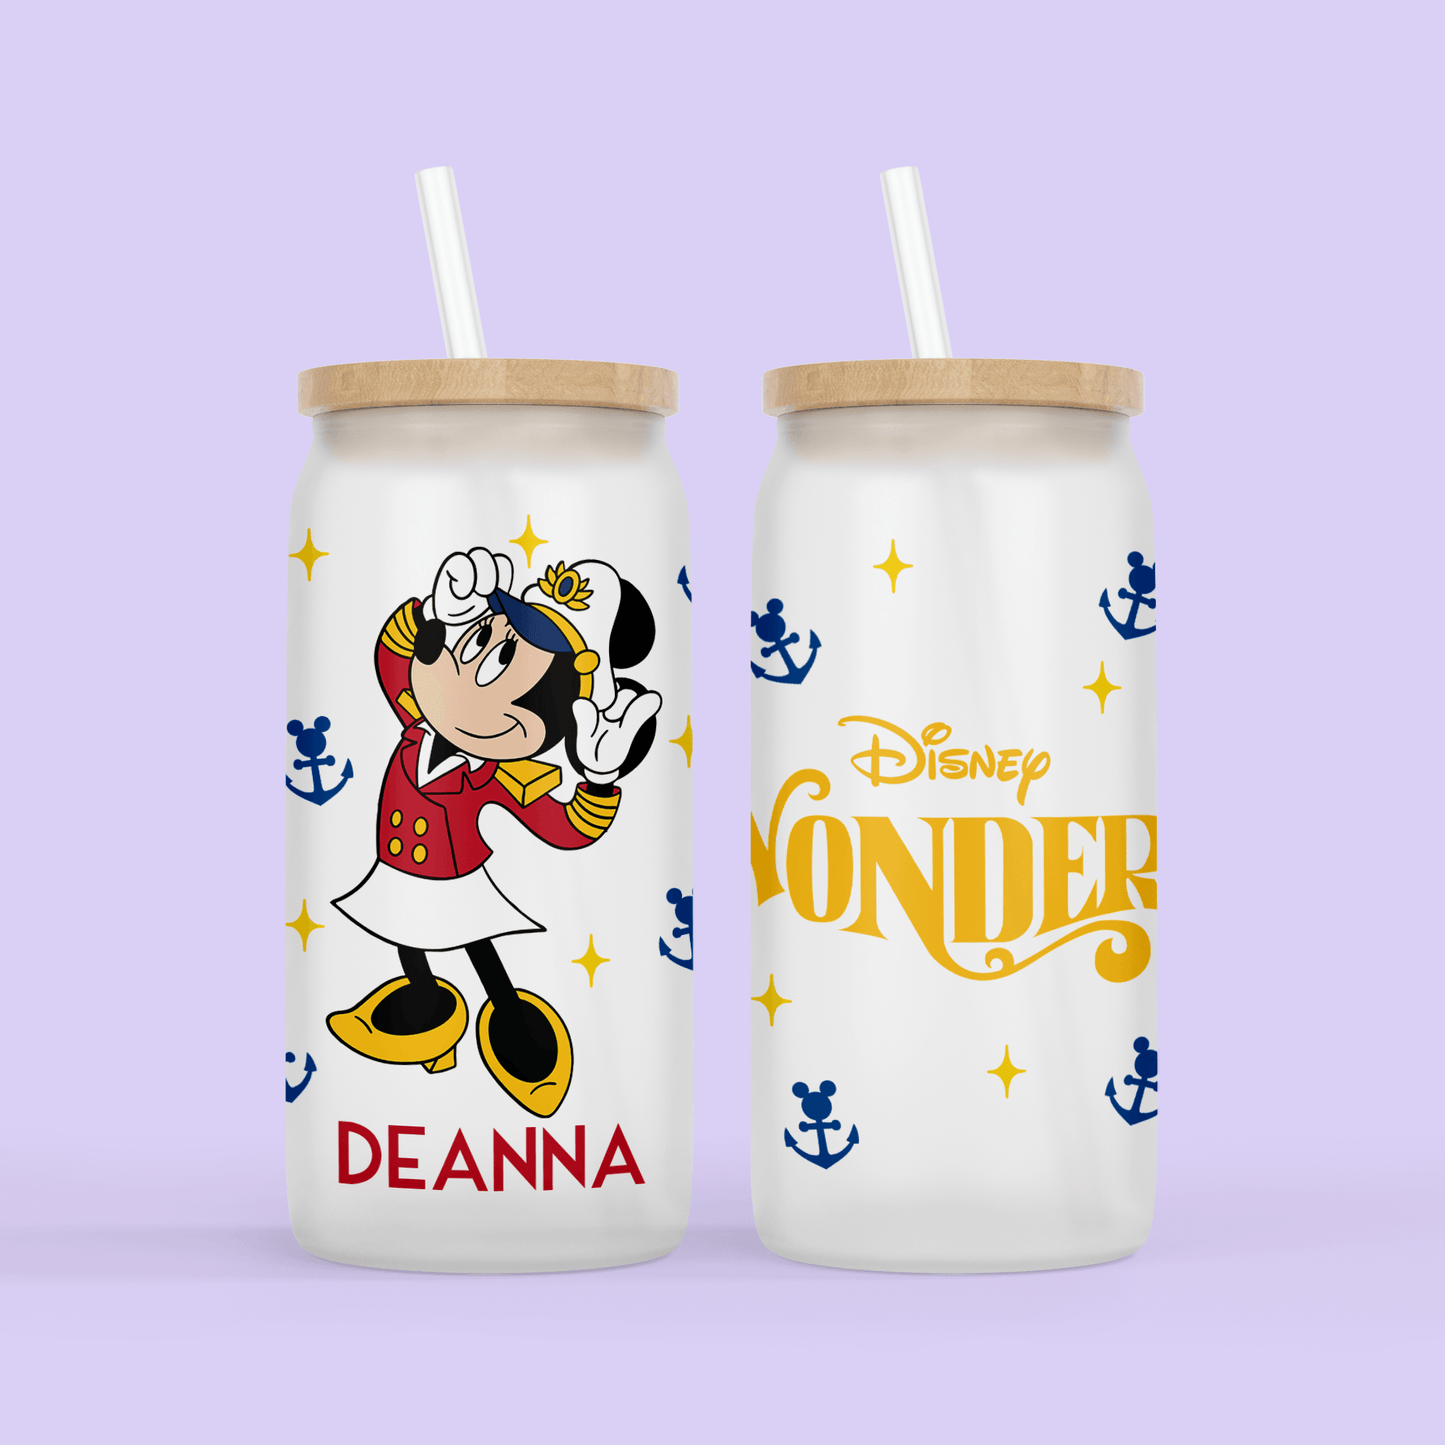 Disney Cruise Line Personalized Drinking Glass - Minnie - Two Crafty Gays